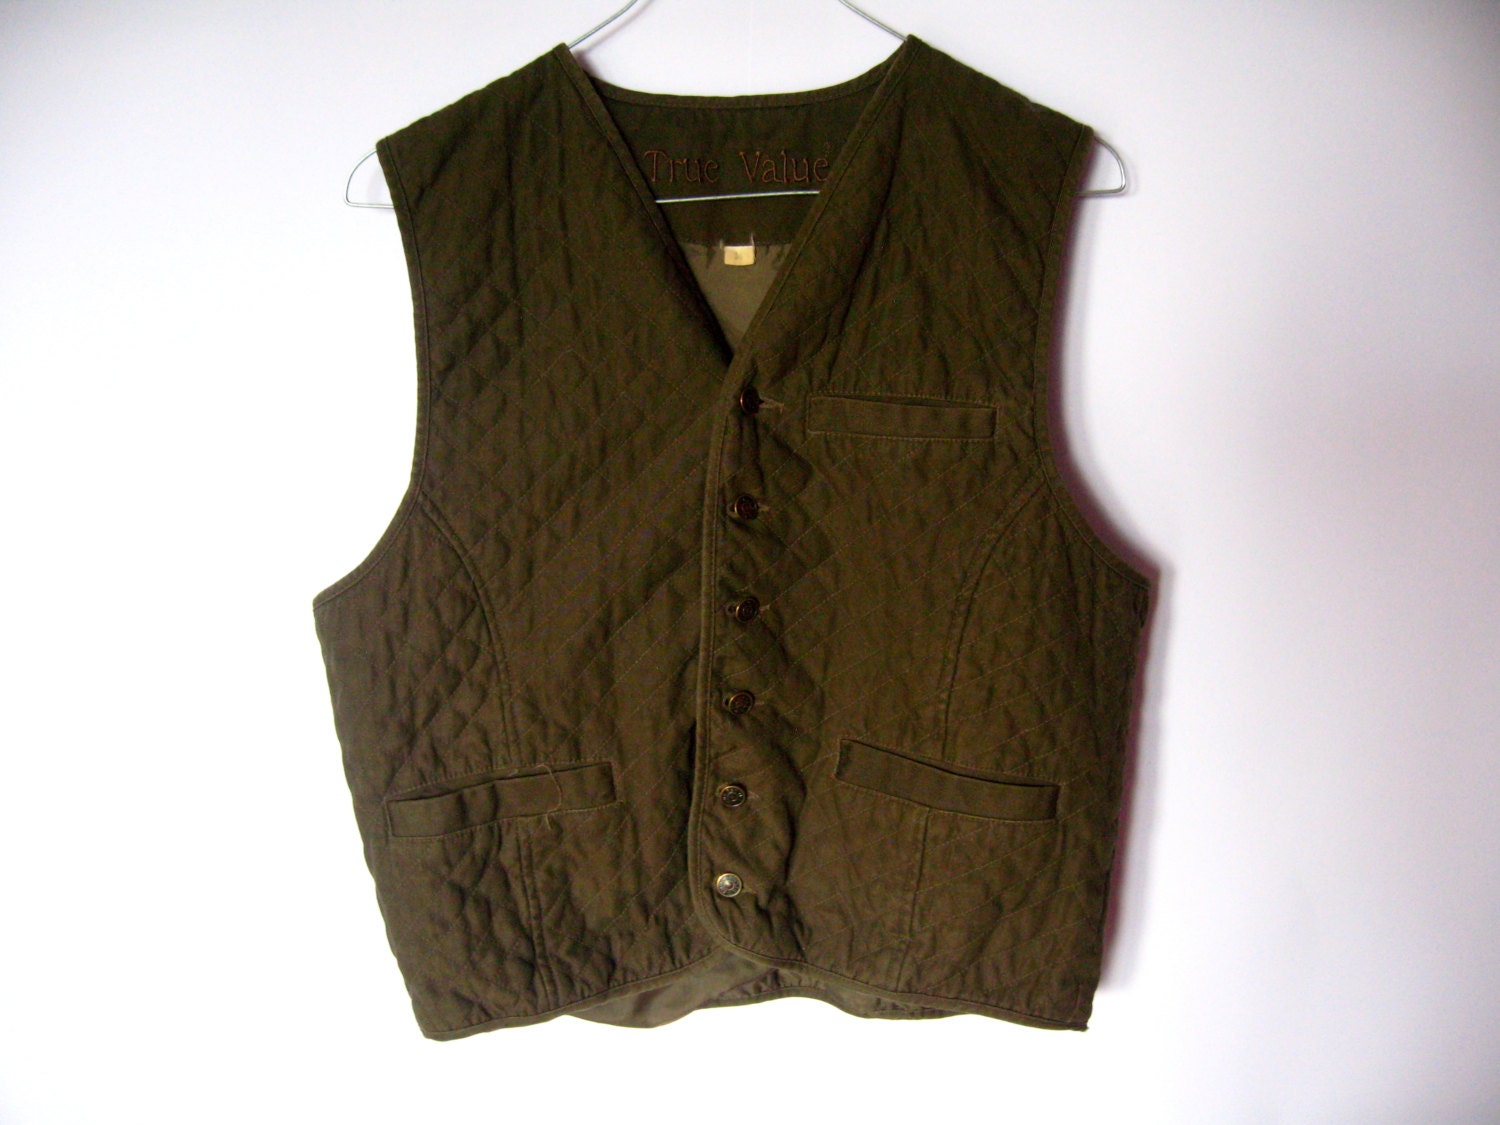 SALE Khaki Green Vintage Vest Military Style Country Style